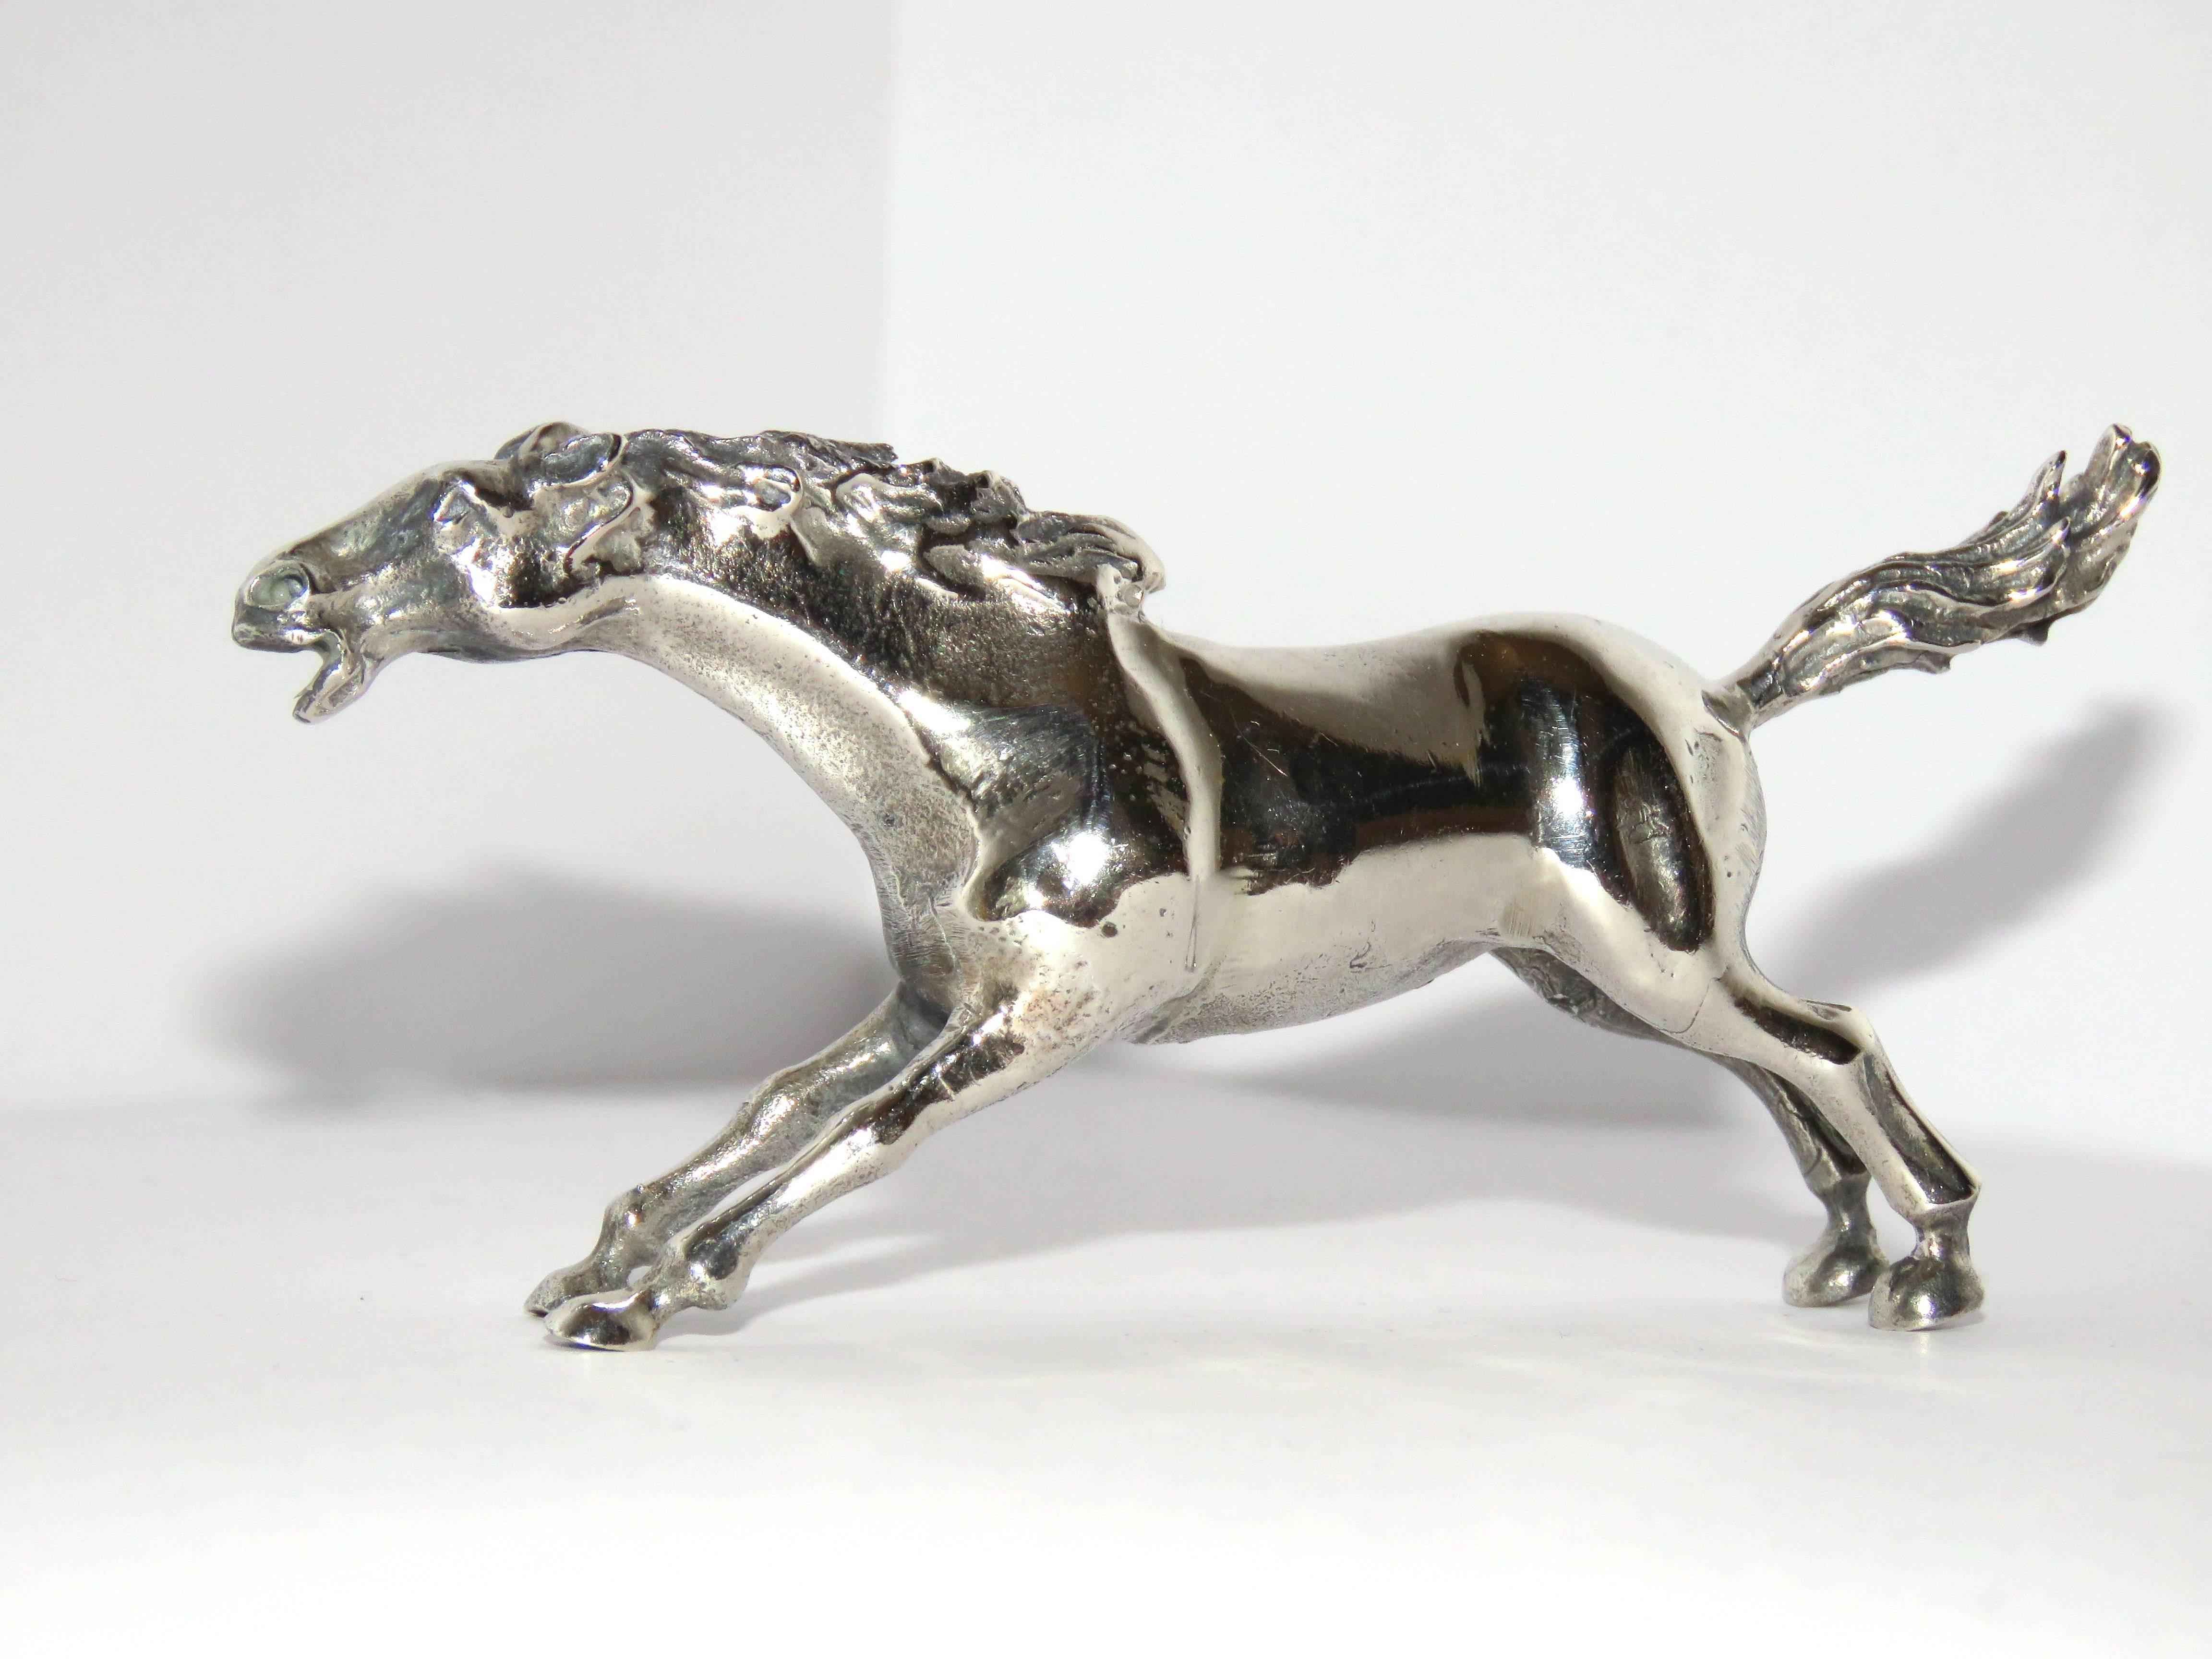 Solid silver horse figurine, in very good vintage condition.
Dimensions: Height 45 mm / 1,77165 inches - Length from tip of tail to tip of nose 105 mm / 4,13386 inches - Width of body 20 mm / 0,787402 inches - Weight 93 grams / 2.99 troy ounces
It 